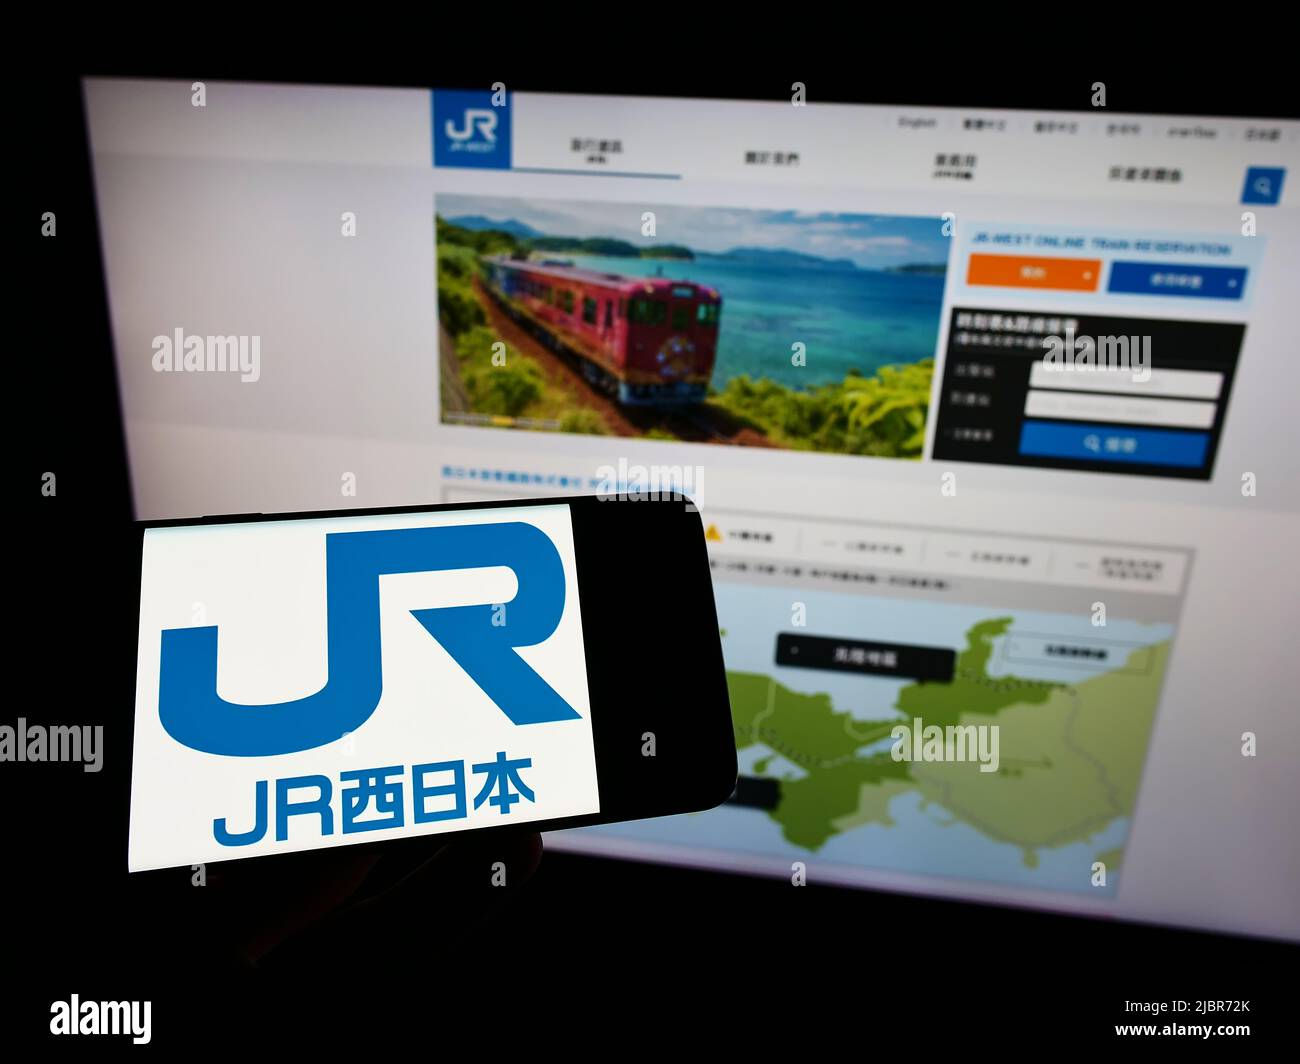 Person holding mobile phone with logo of Japanese company West Japan Railway (JR) on screen in front of business web page. Focus on phone display. Stock Photo